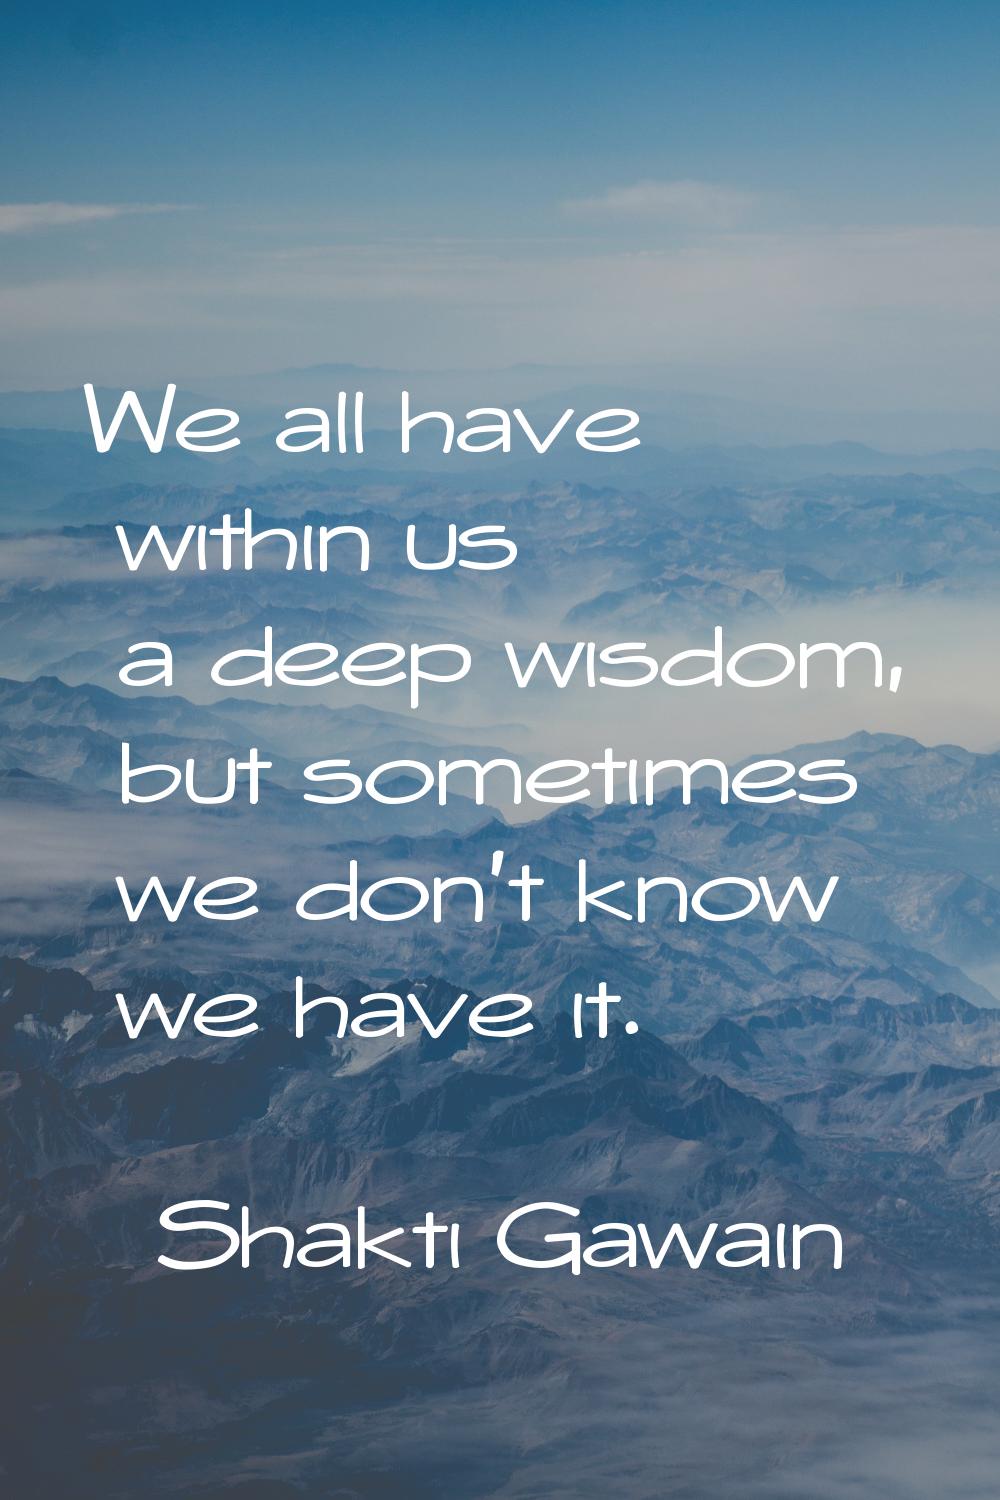 We all have within us a deep wisdom, but sometimes we don't know we have it.